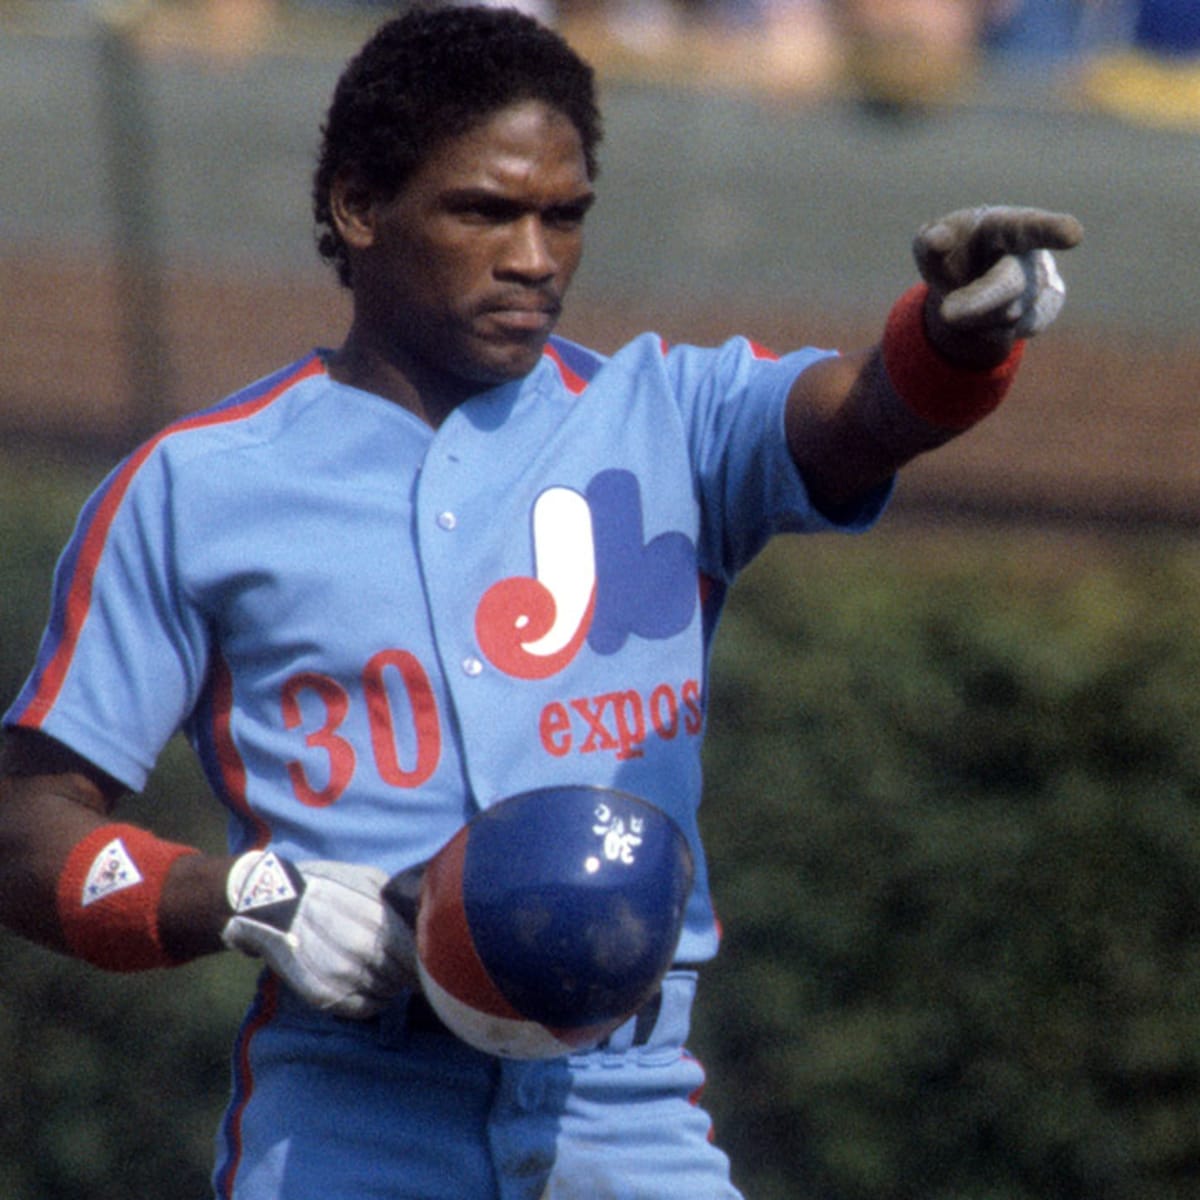 Tim Raines is a Hall of Famer, and the numbers couldn't be more convincing